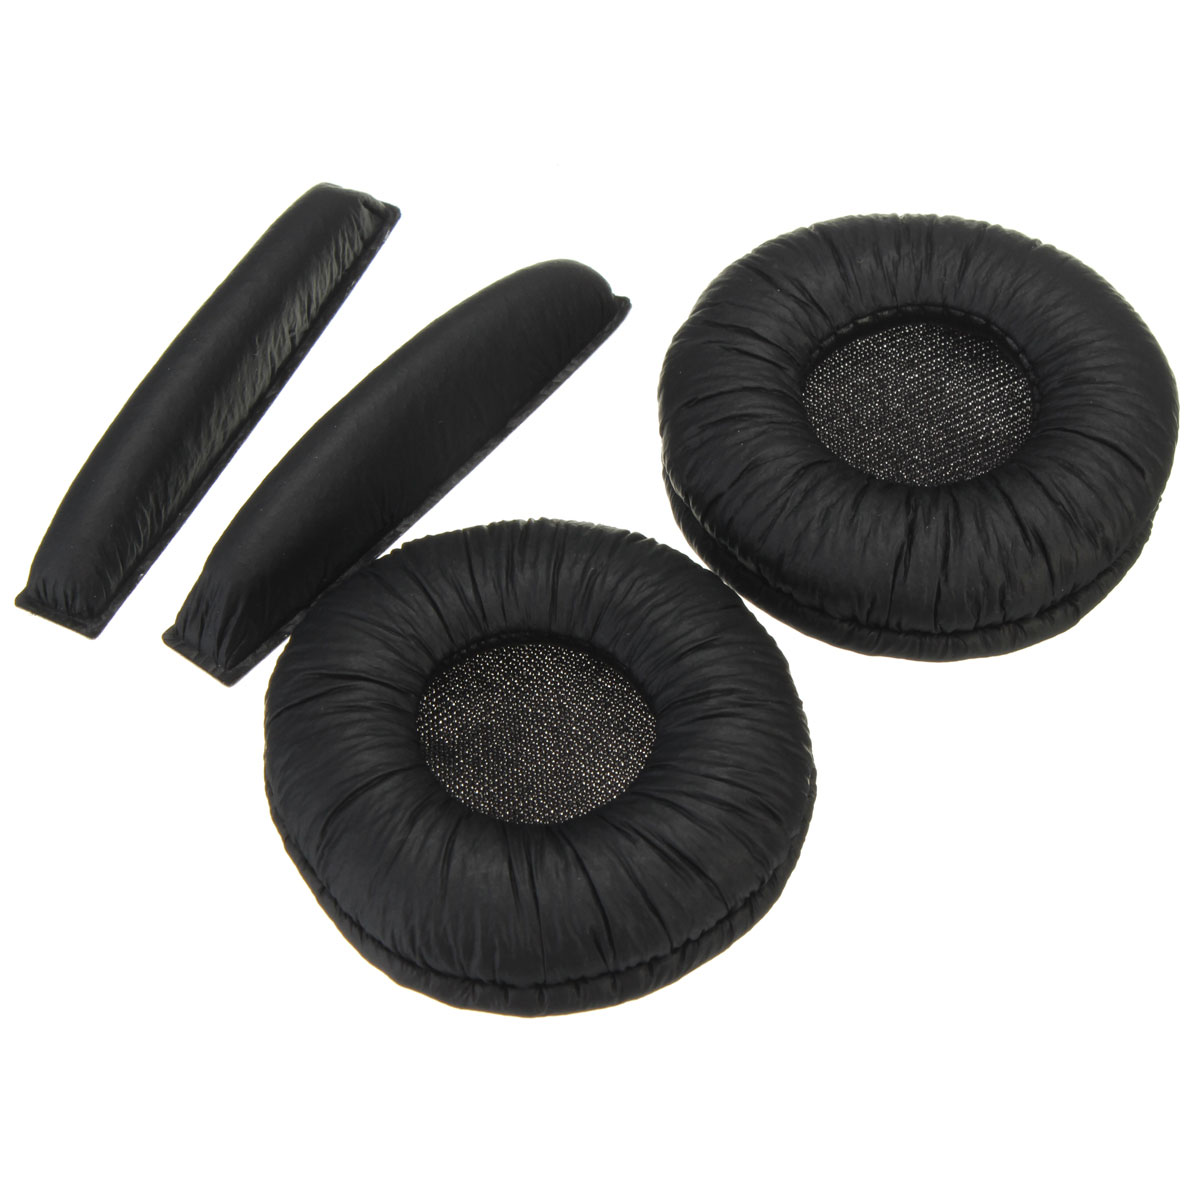 LEORY-1-Pair-For-Sennheiser-PX100-PX200-Headphone-Replacement-Ear-Pads-Cover-Headband-Cushion-1782024-7